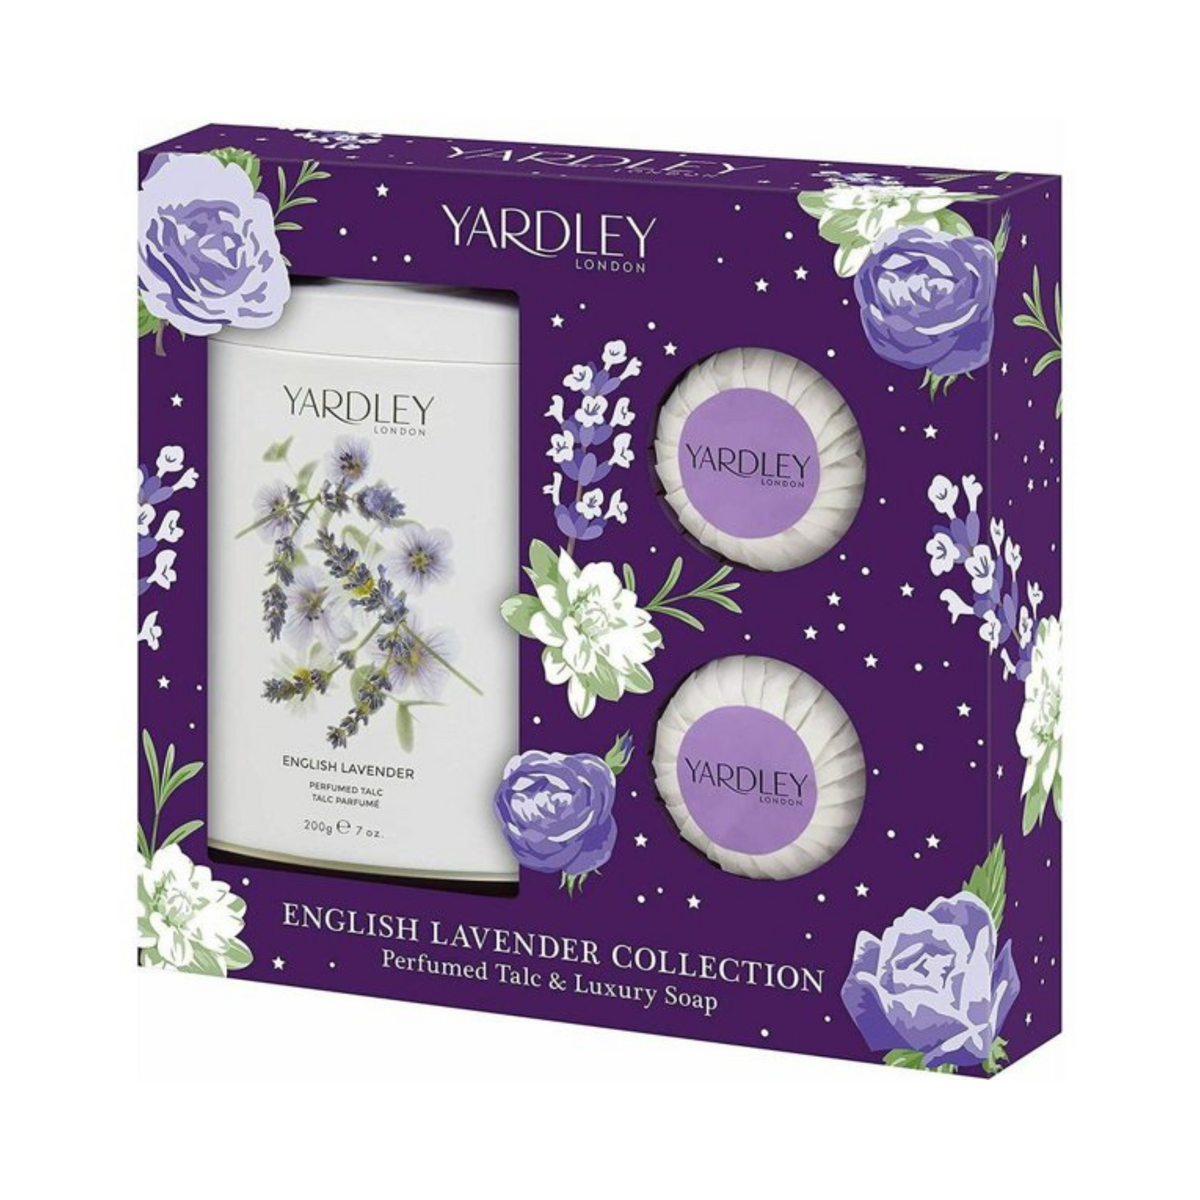 Primary Image of Yardley English Lavender Collection (3 count set) 